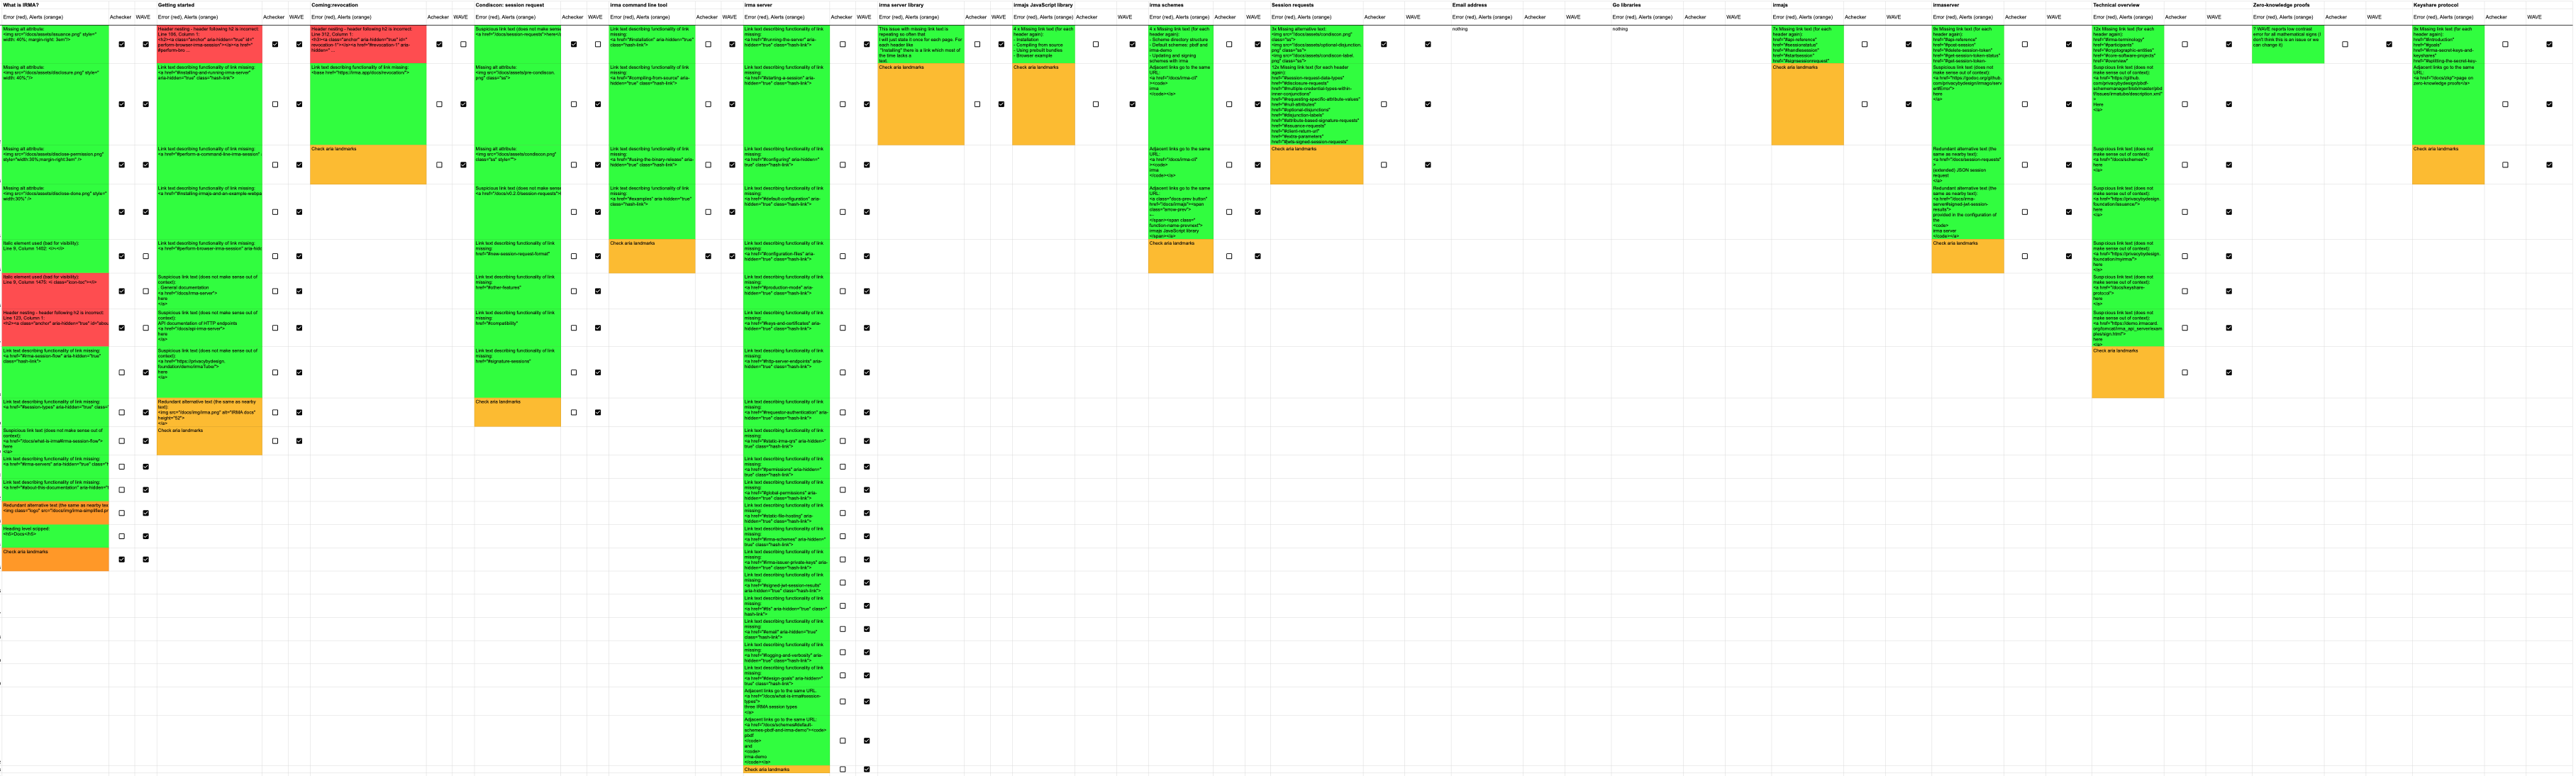 A screenshot showing a global overview of the accessibility issues in our spreadsheet after most issues have been fixed.